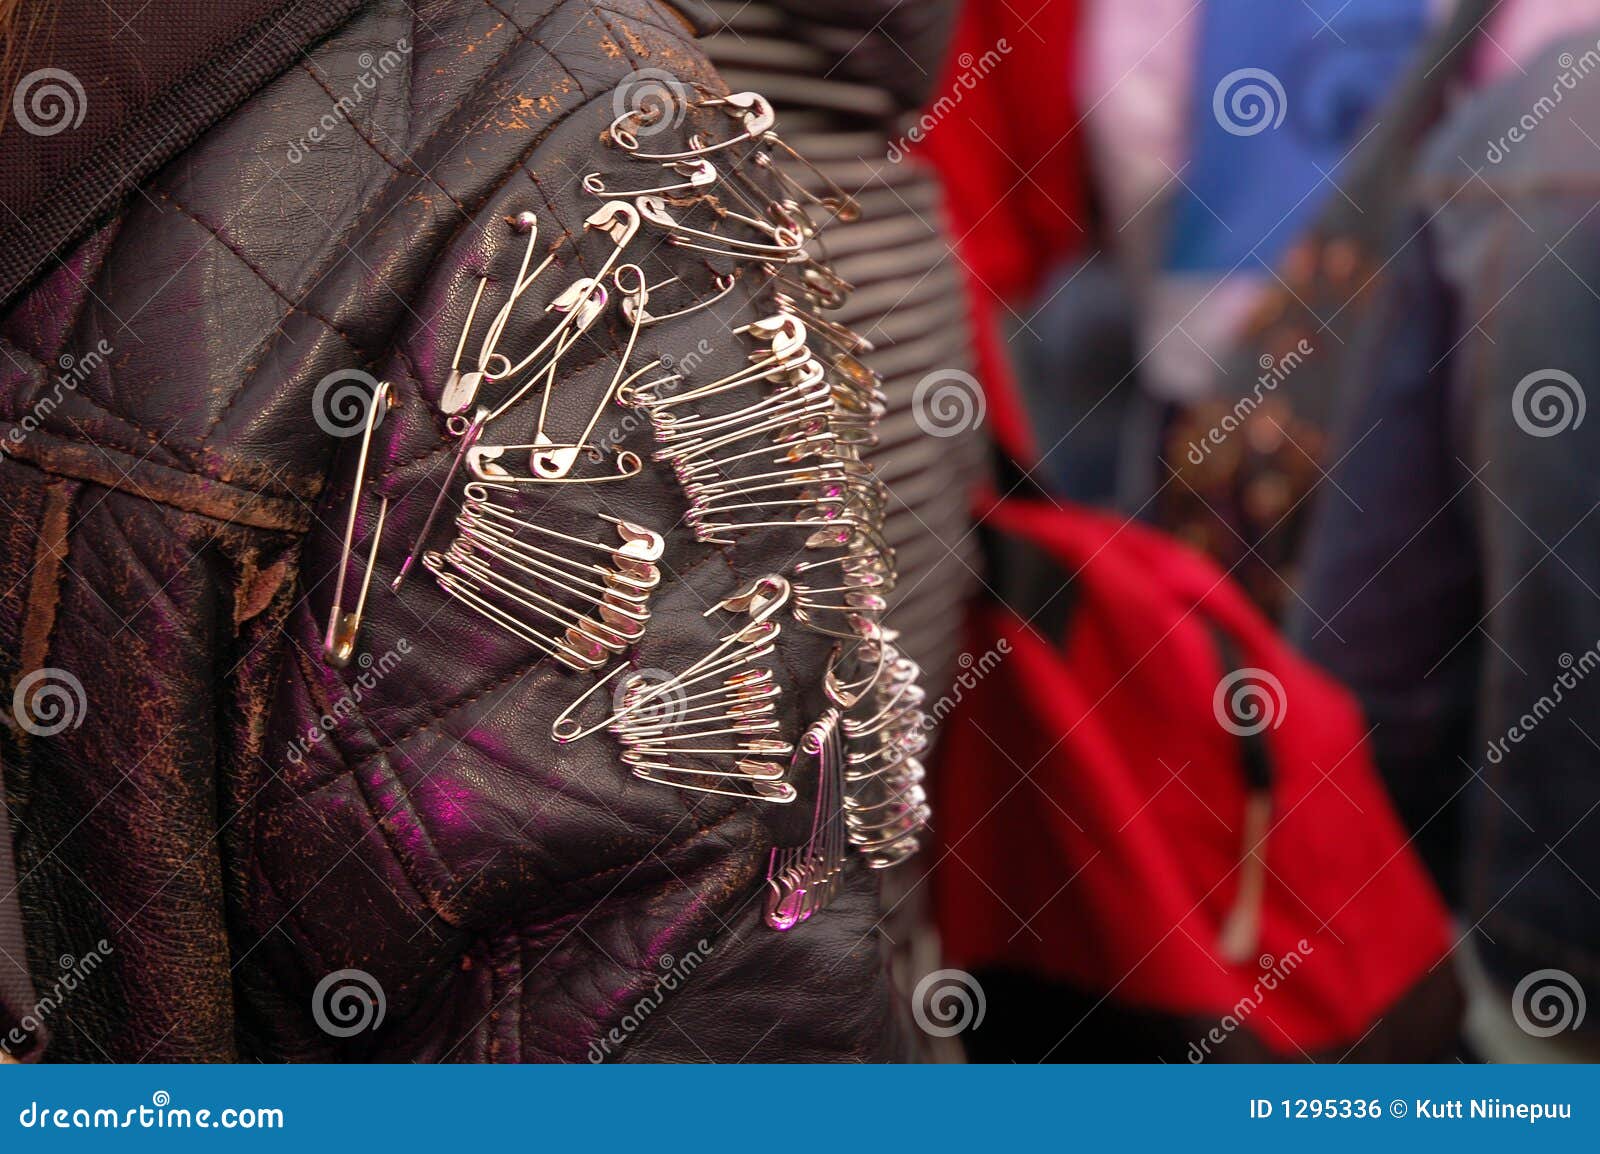 Safety Pins On Leather Jacket Royalty Free Stock Image